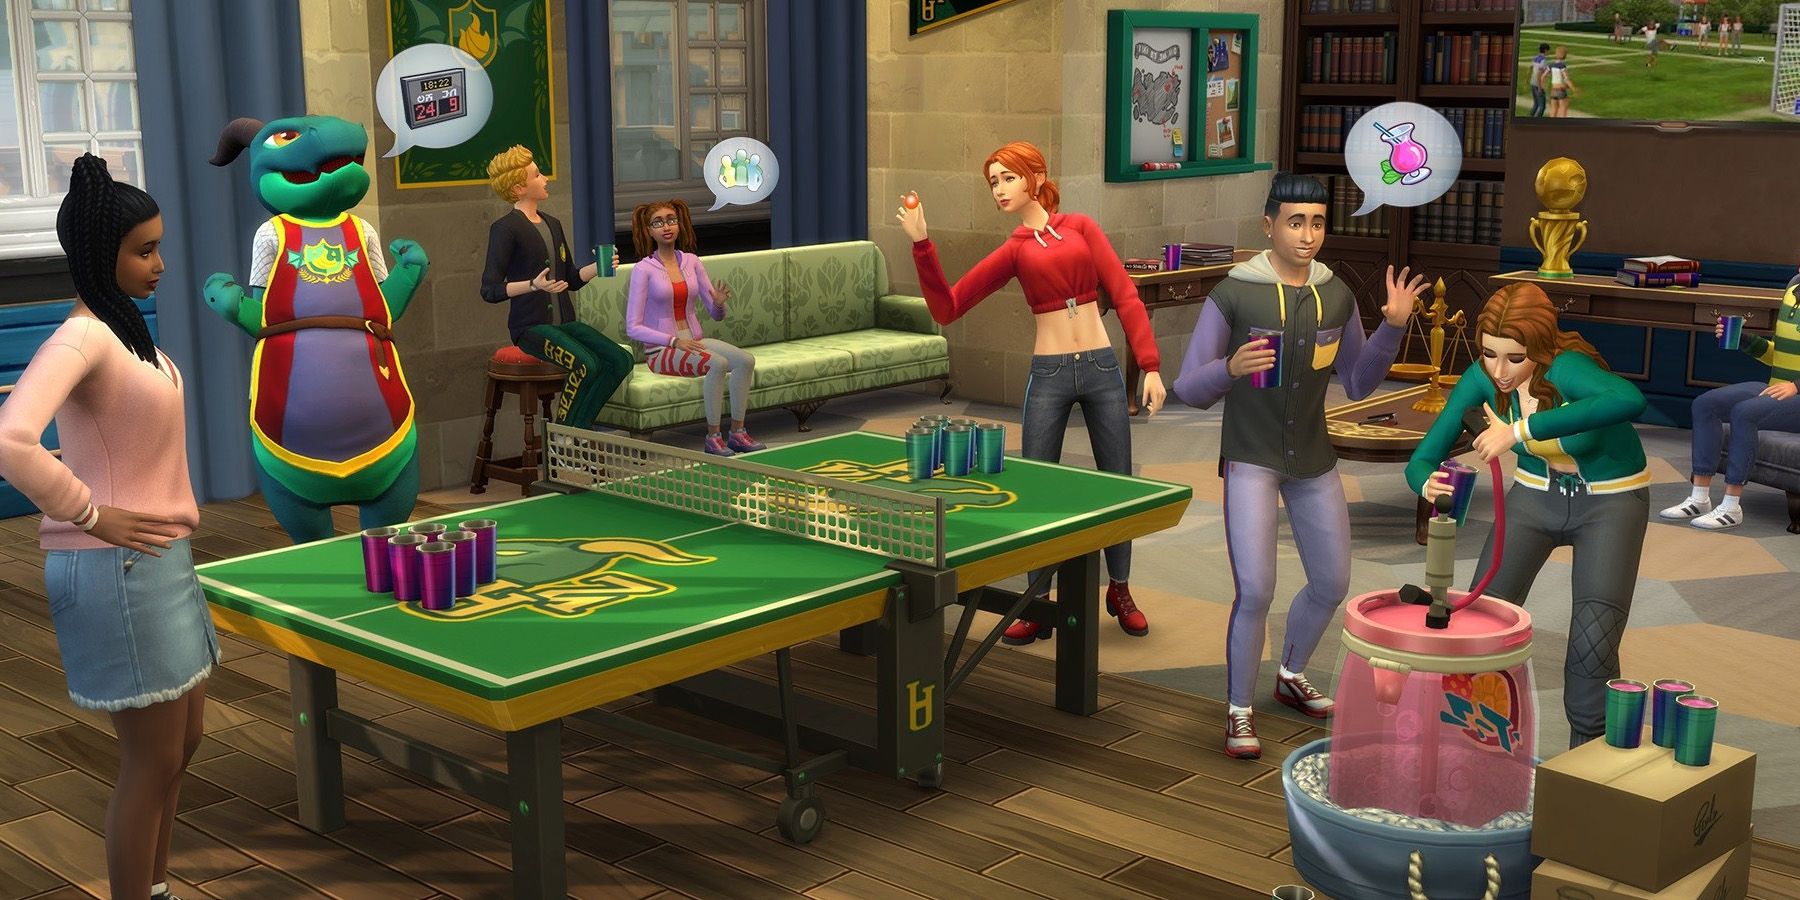 Paradox reveals Sims competitor Life by You - The Verge